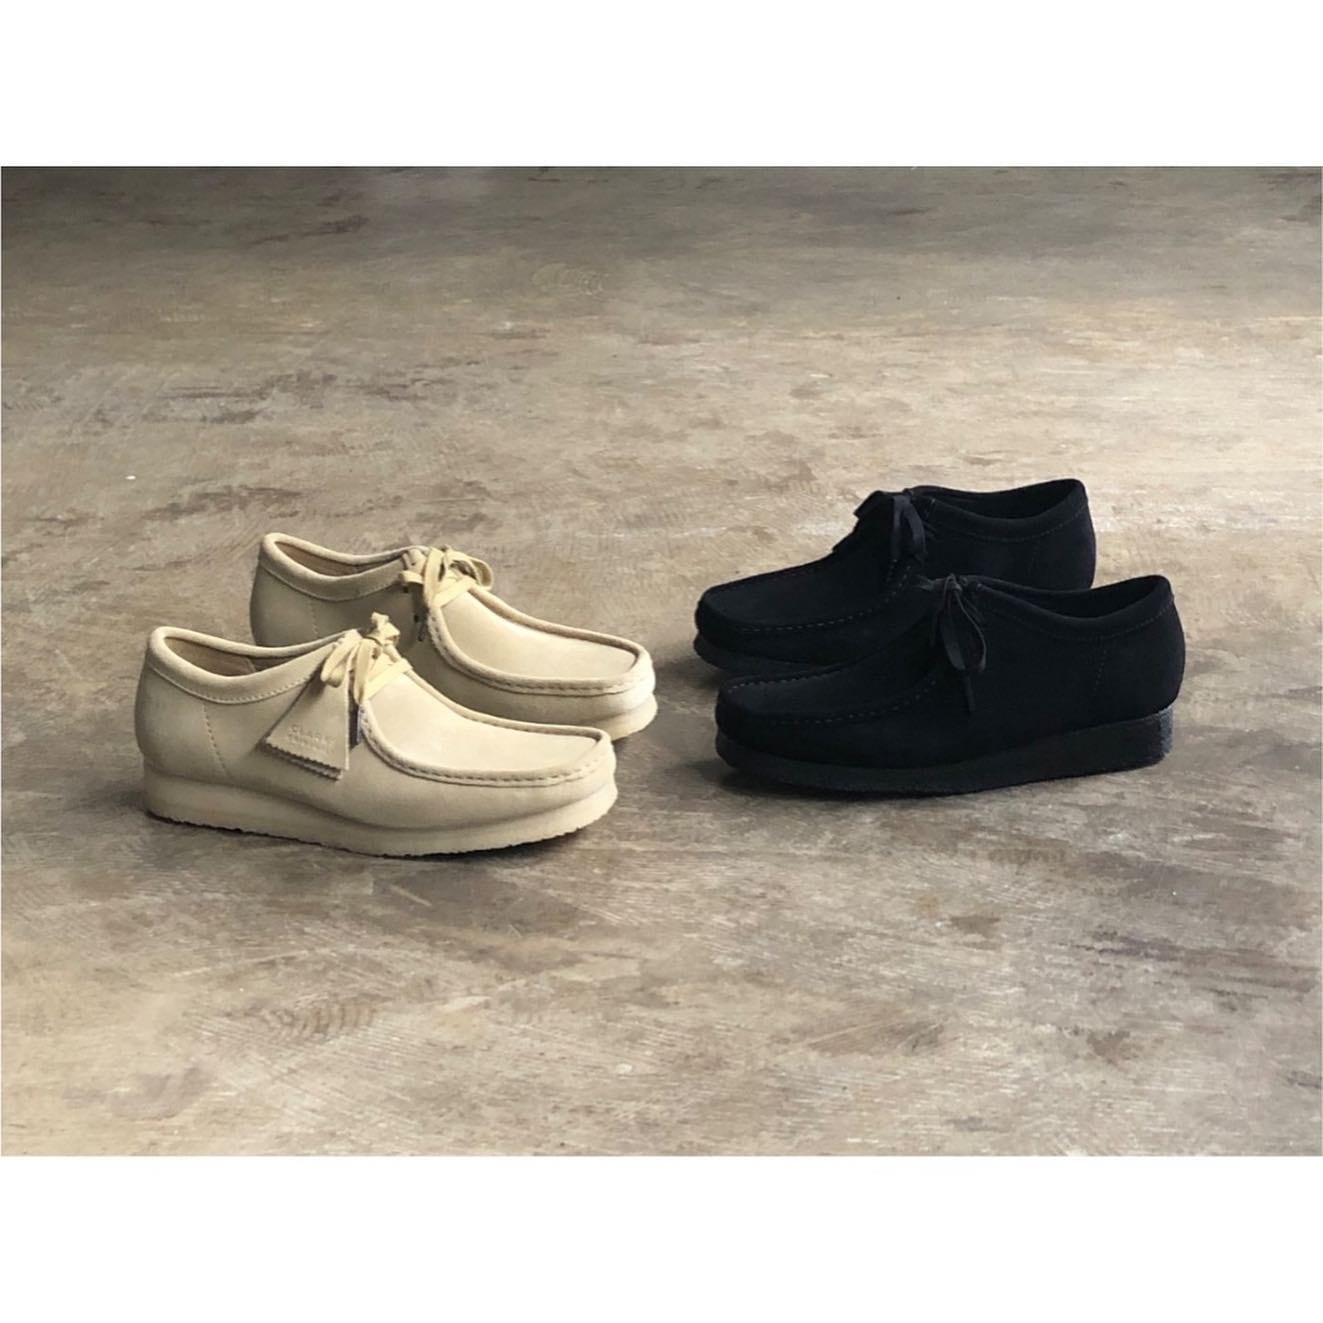 Clarks Originals(クラークス オリジナルズ) 『Wallabee』Suede Crepe Sole shoes MENS |  AUTHENTIC Life Store powered by BASE